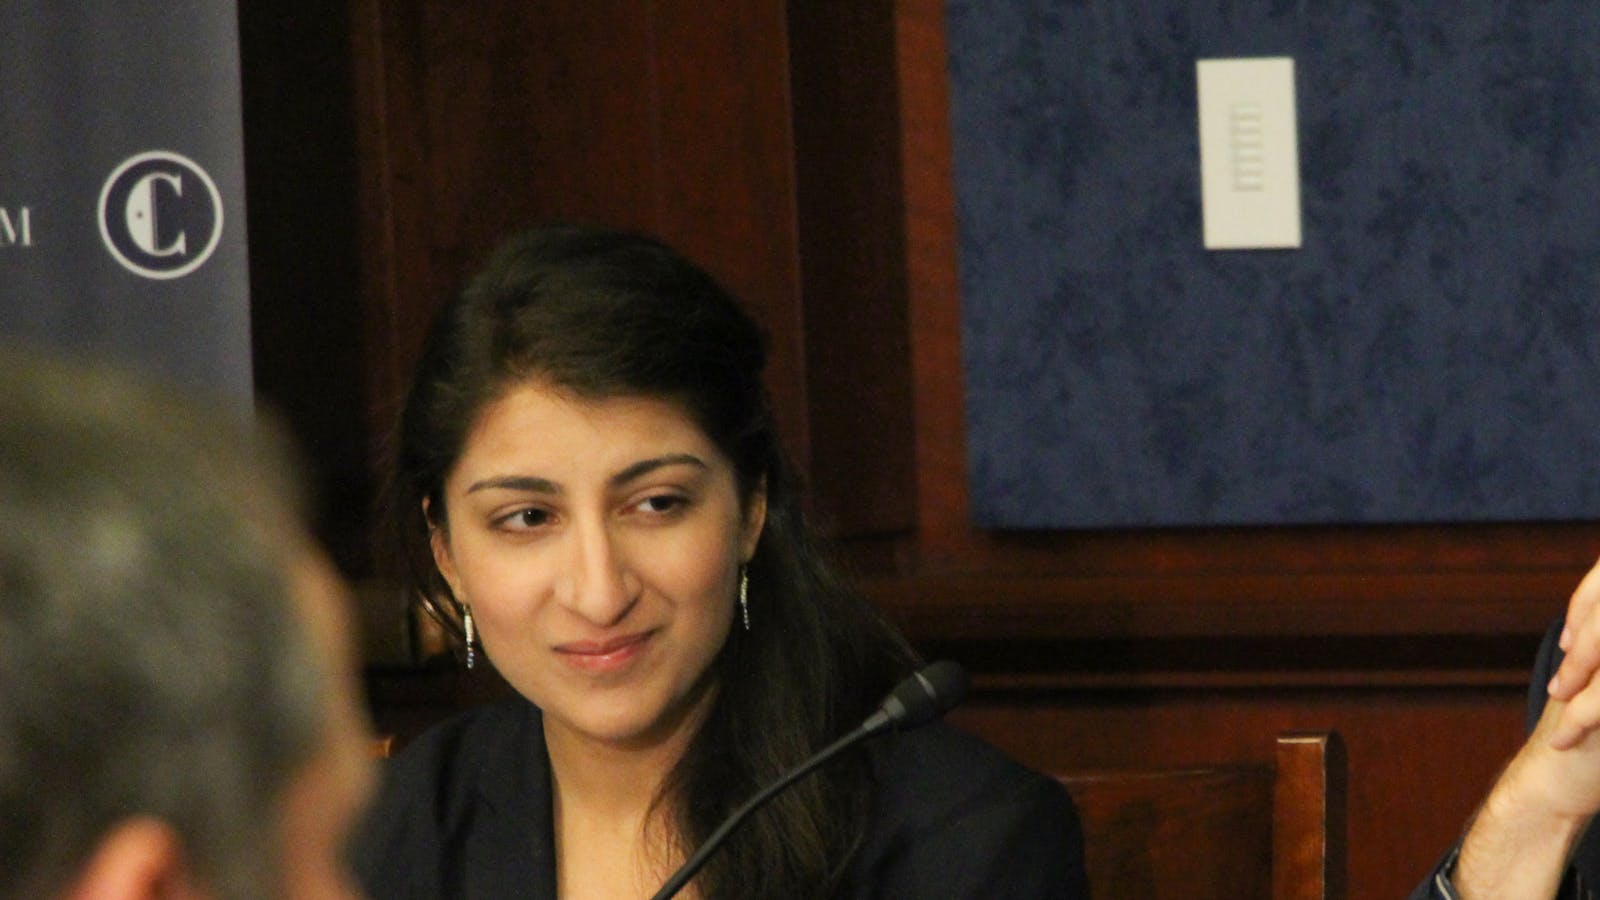 FTC Chair Lina Khan. Credit: New America/Flickr